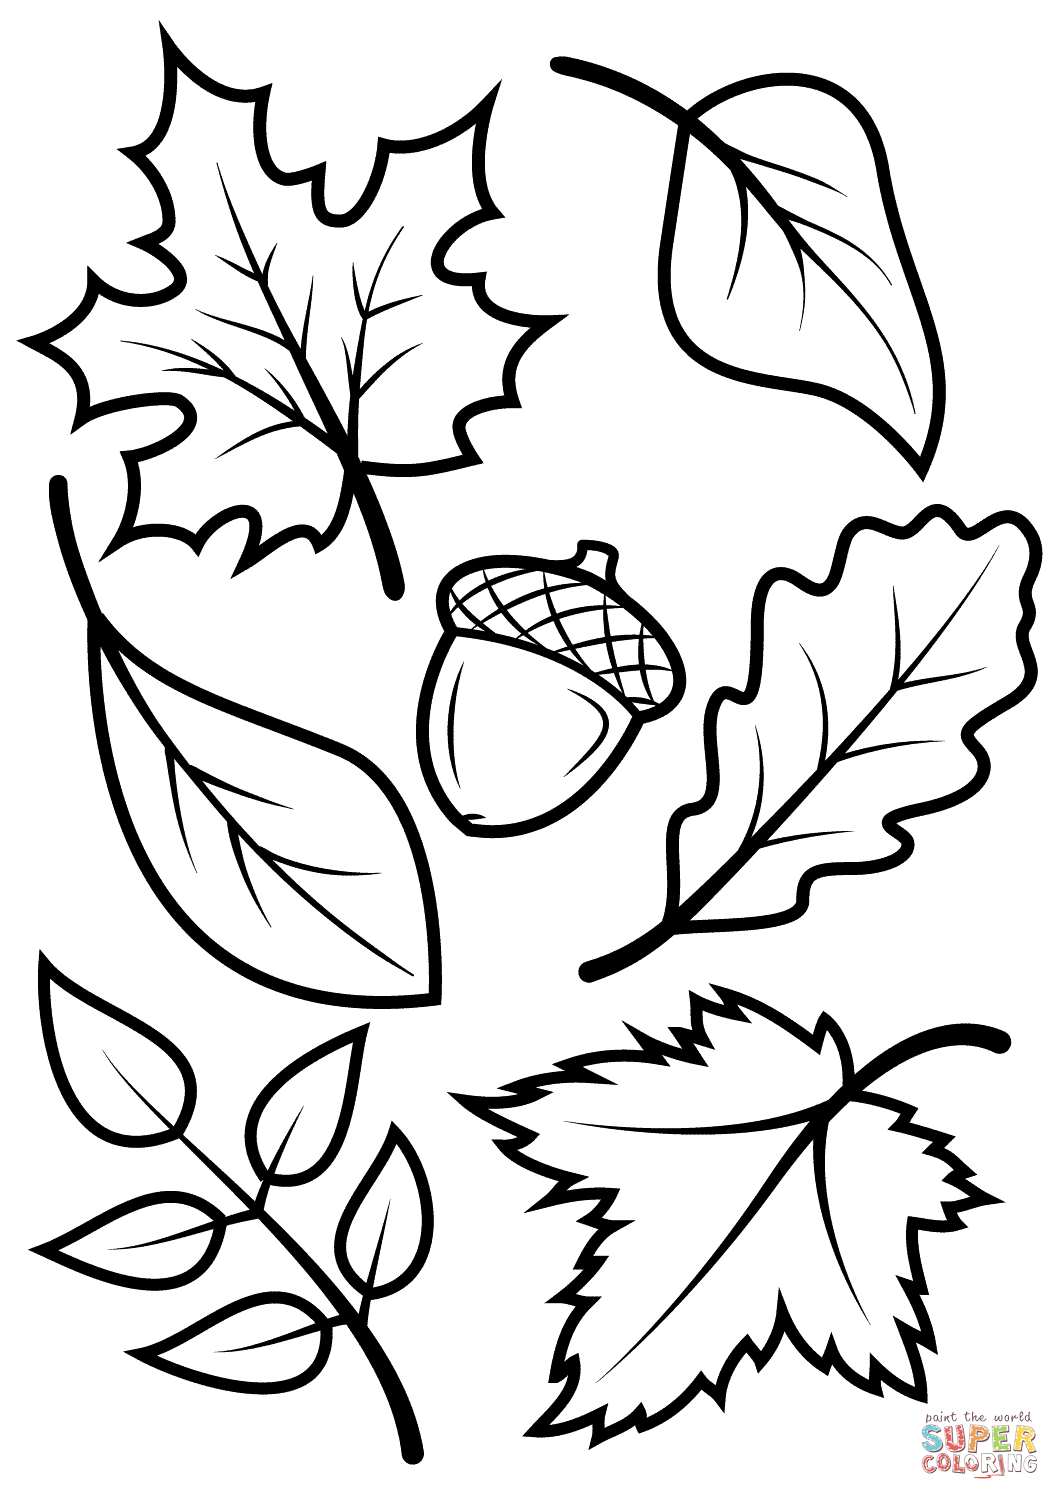 Fall leaves and acorn coloring page free printable coloring pages